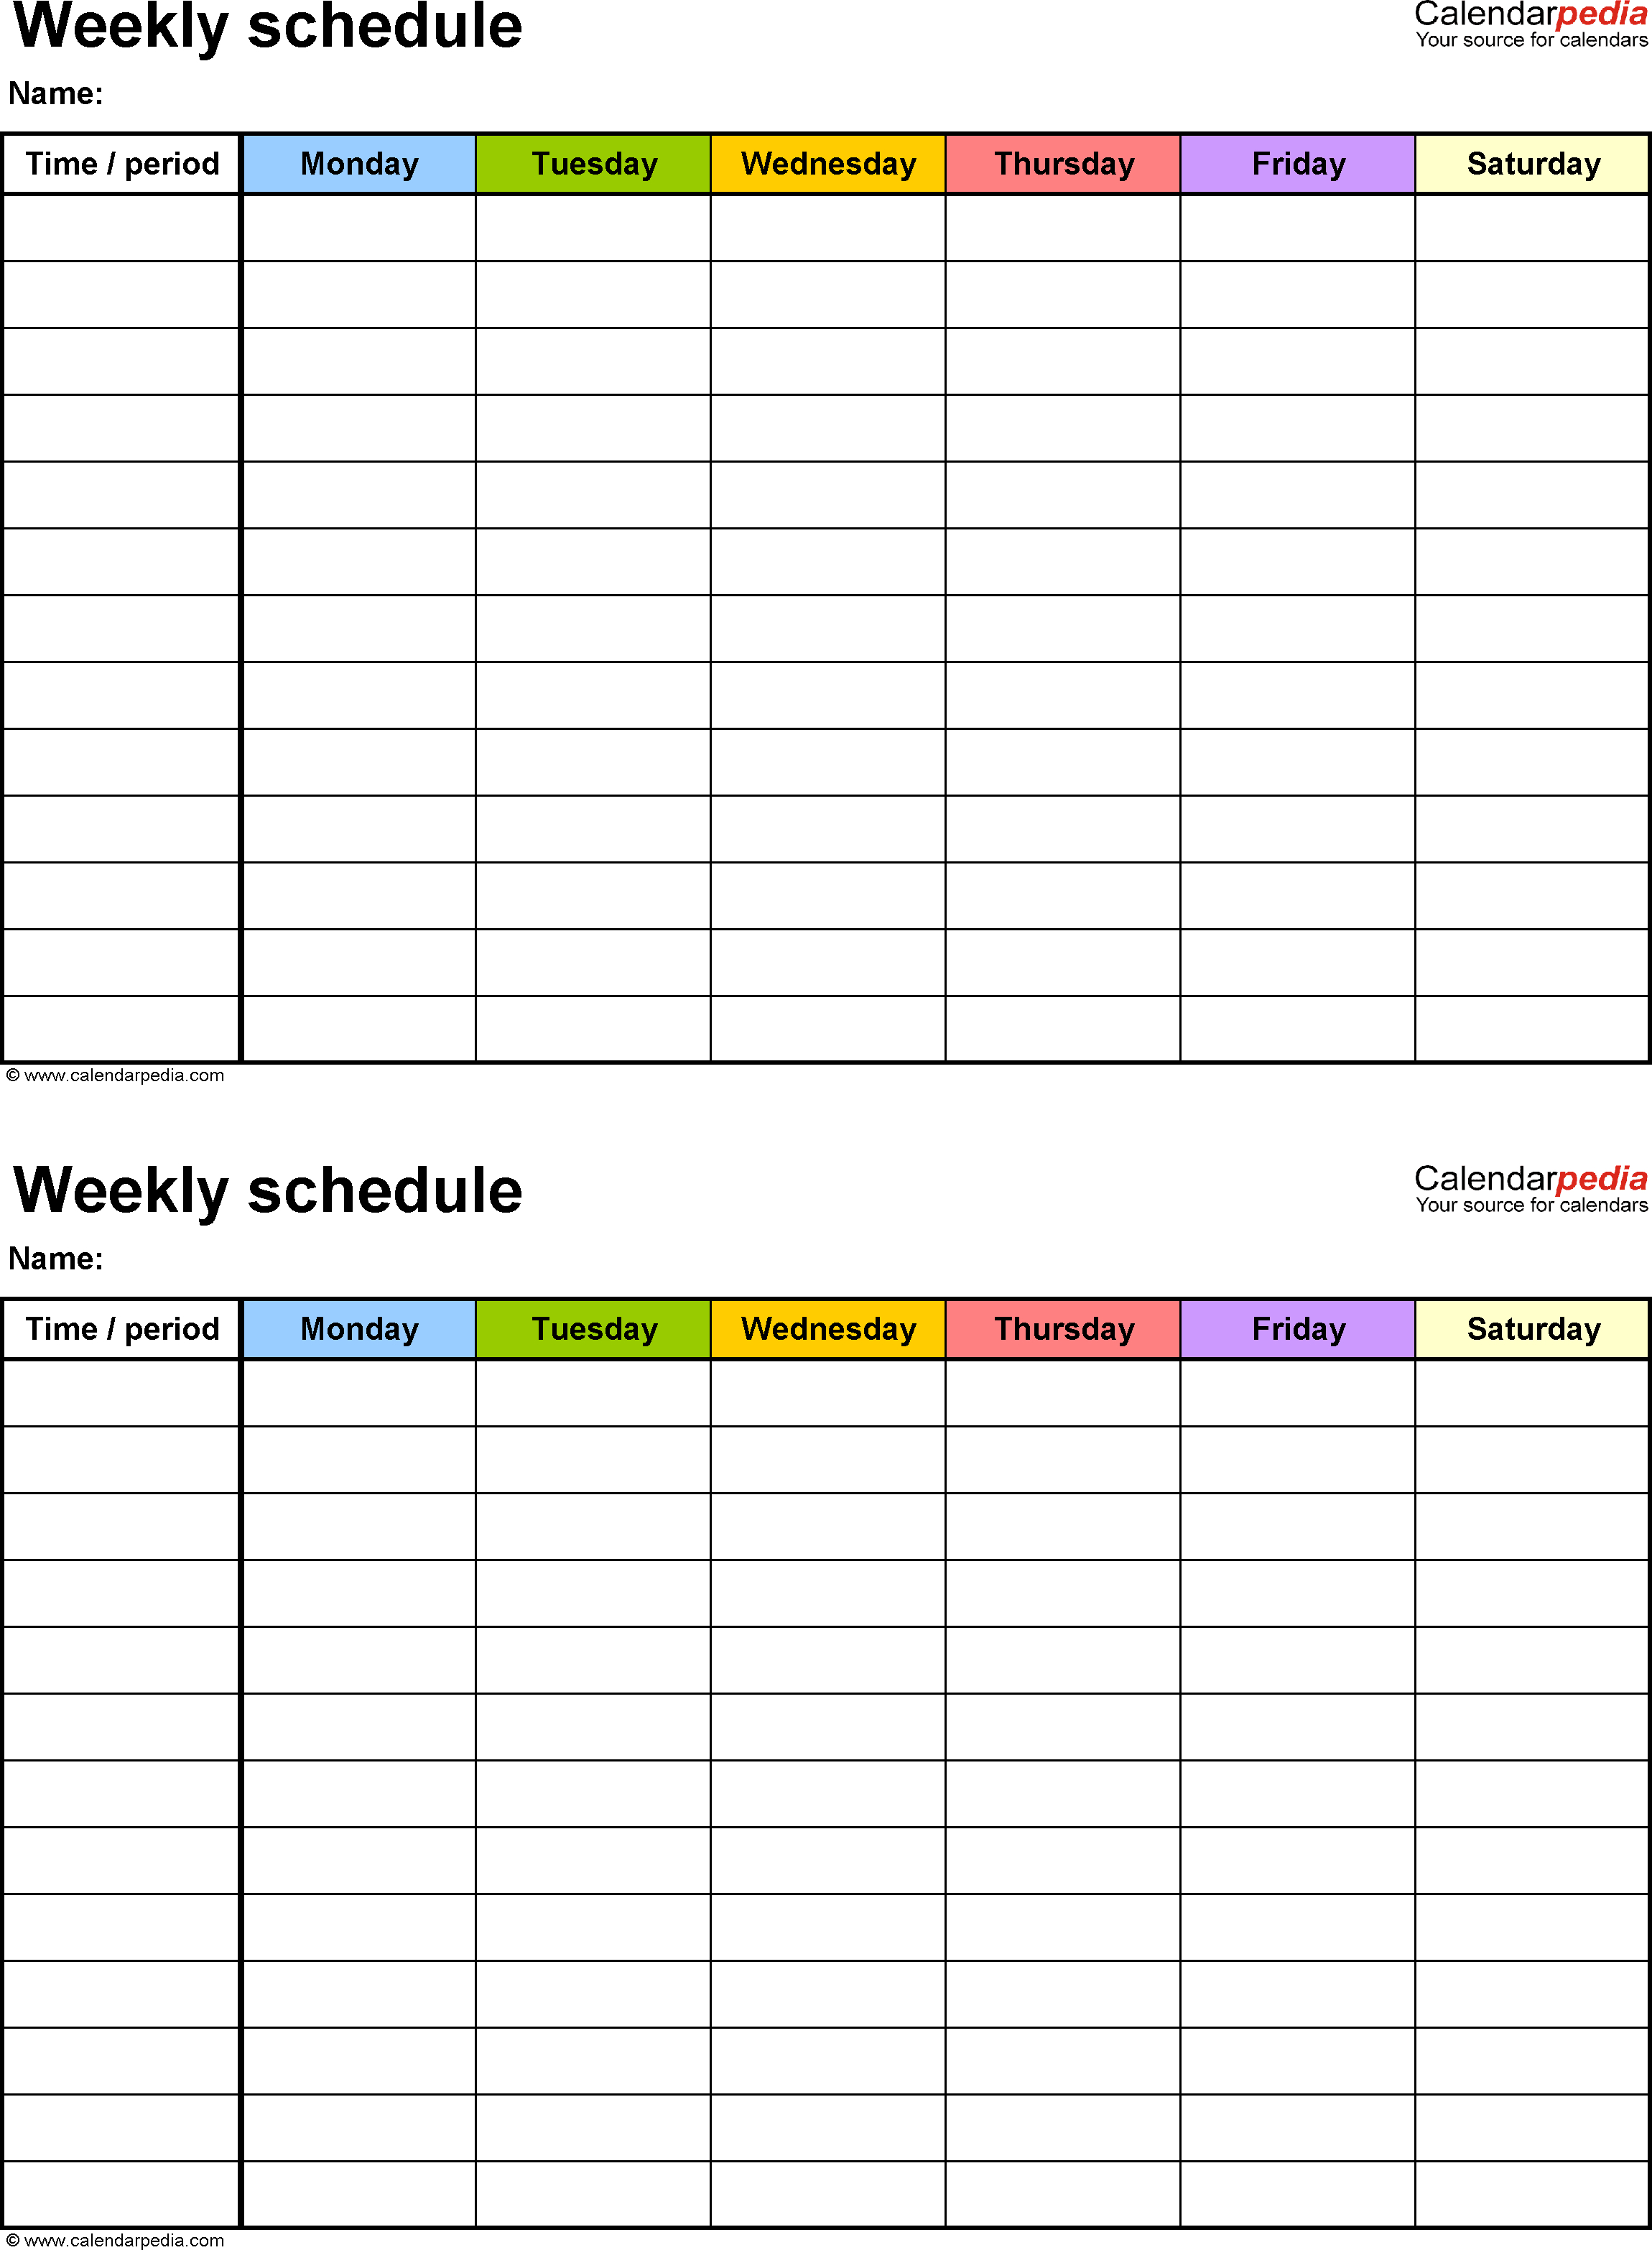 Free Weekly Schedule Templates For Word - 18 Templates - Free Printable Weekly Work Schedule